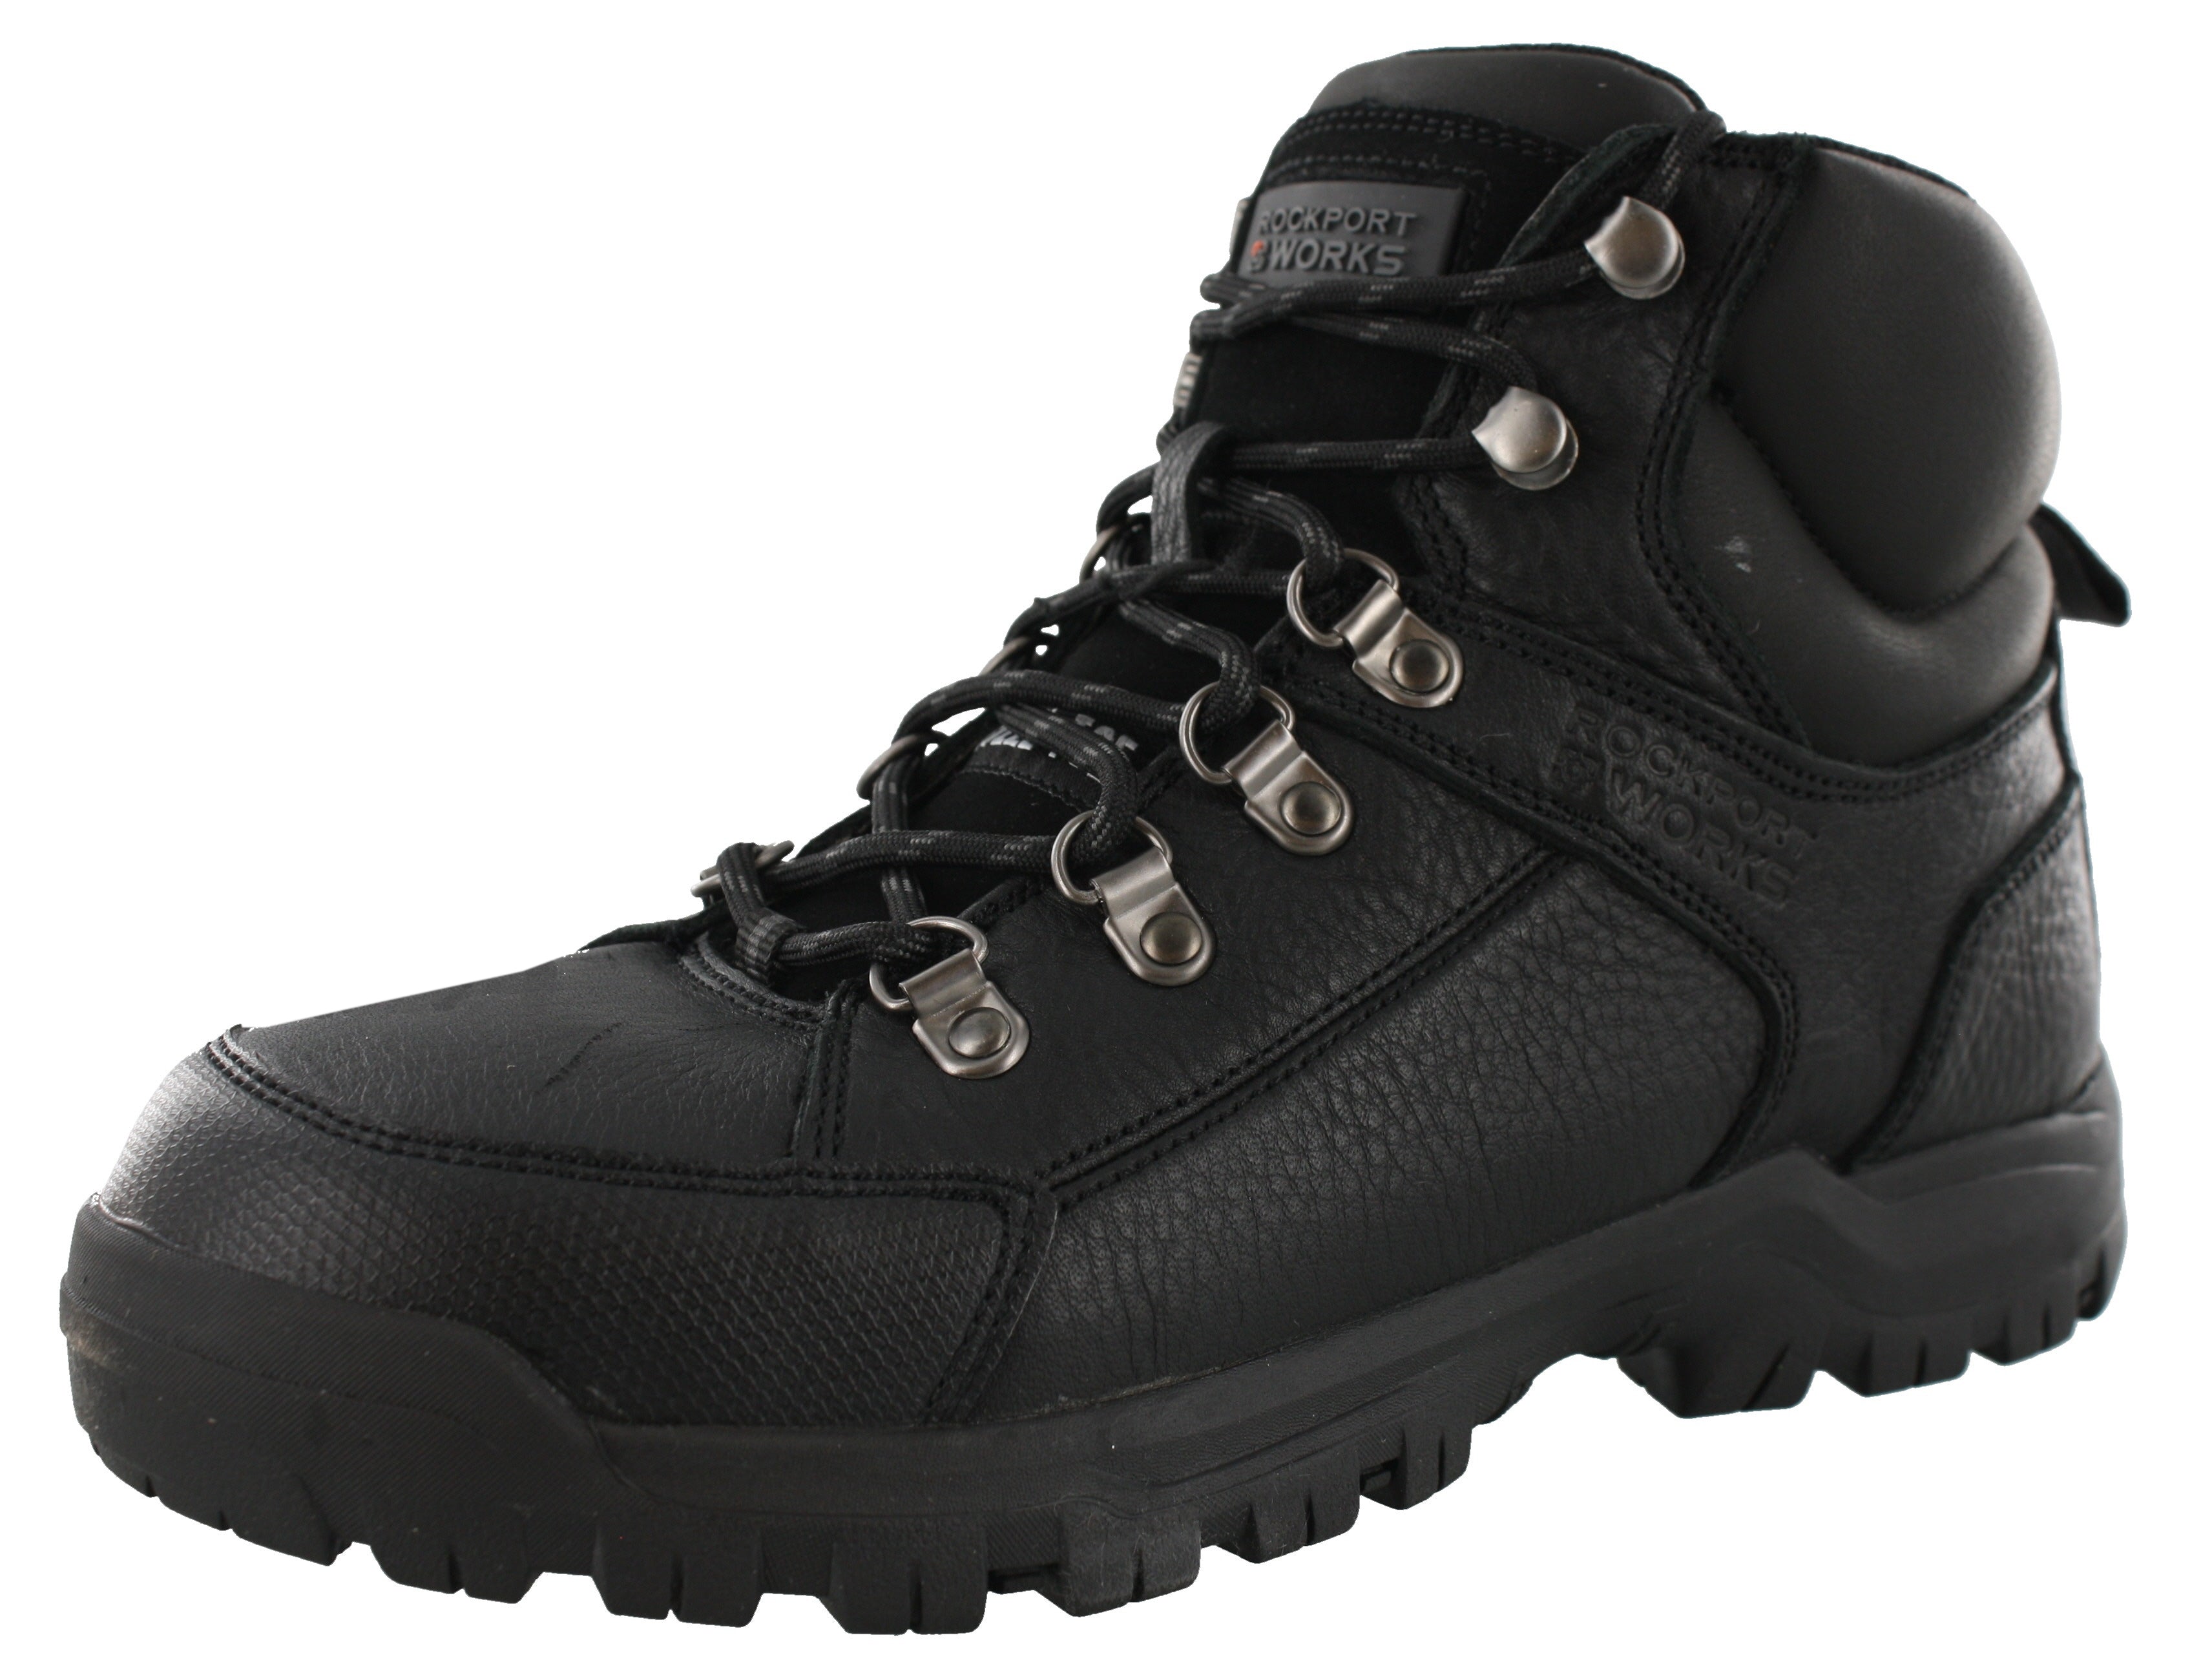 Rockport Work Safety Shoes & Boots for Men - Casual & Dress